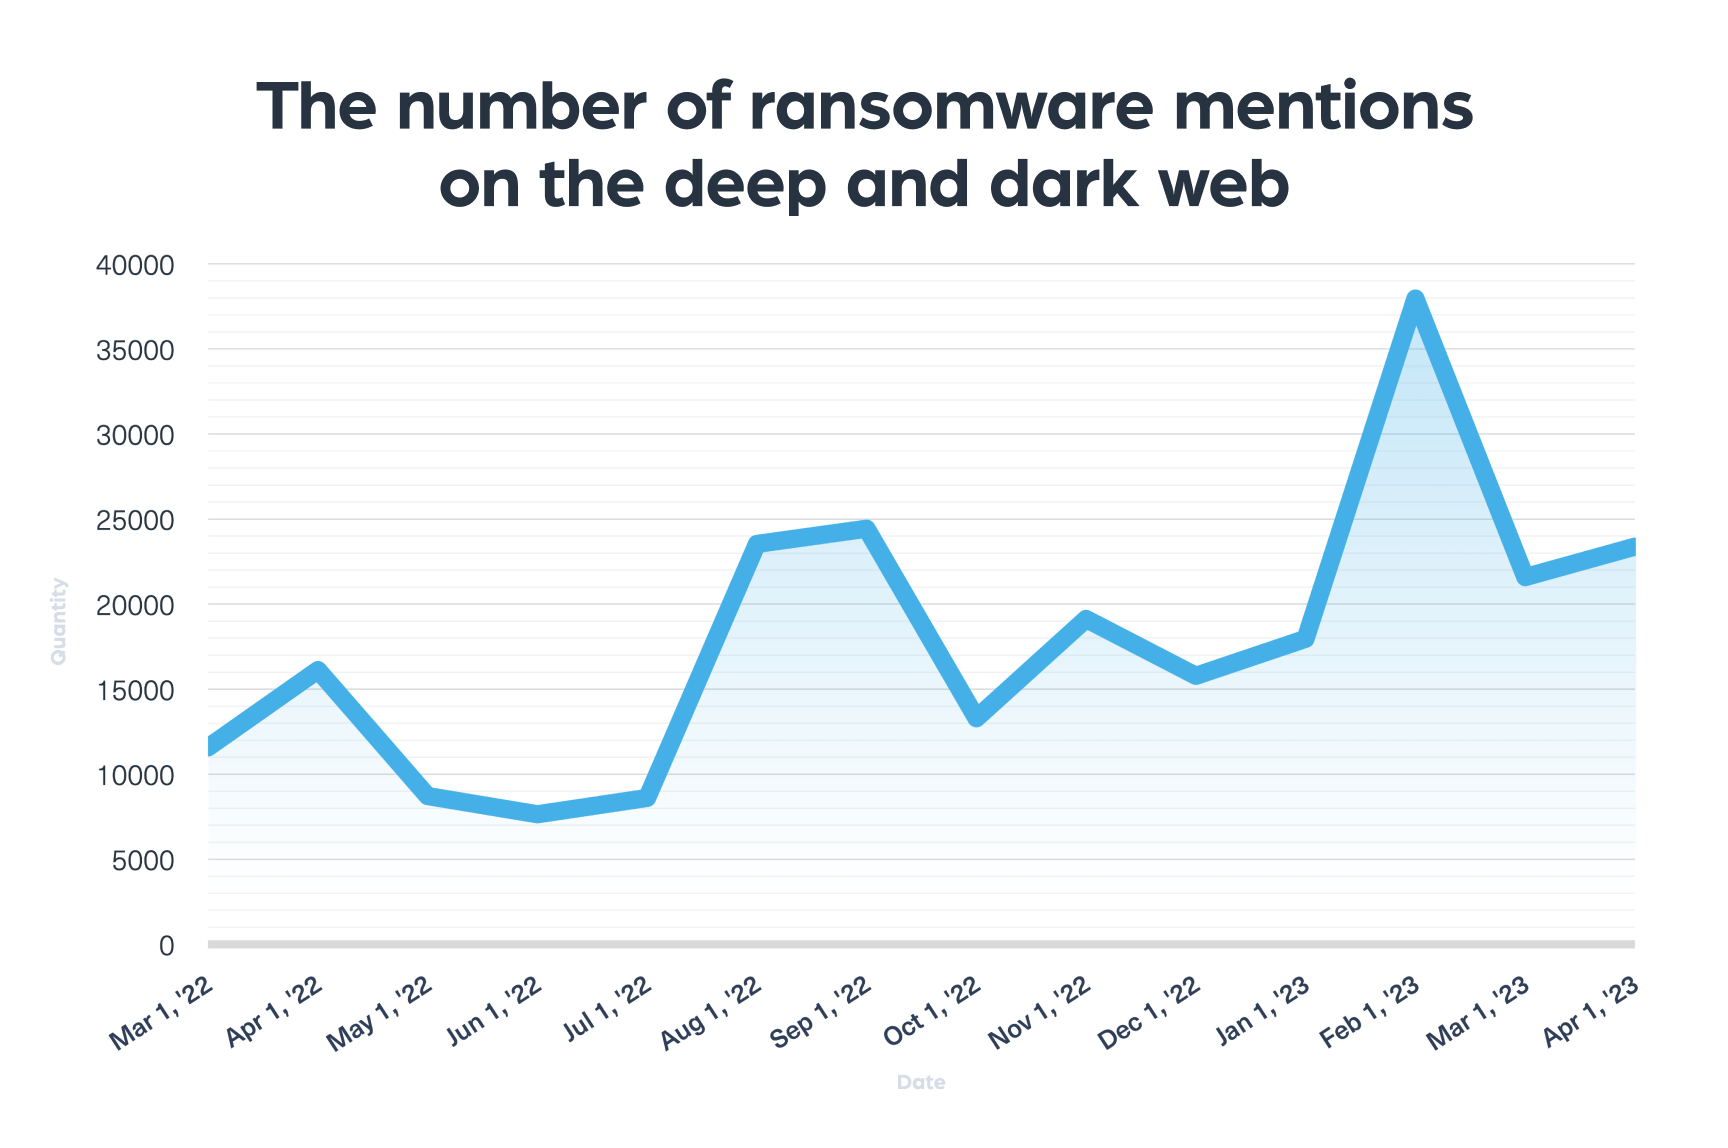 A chart showing the number of ransomware mentions on the deep and dark web from March 2022 to April 2023